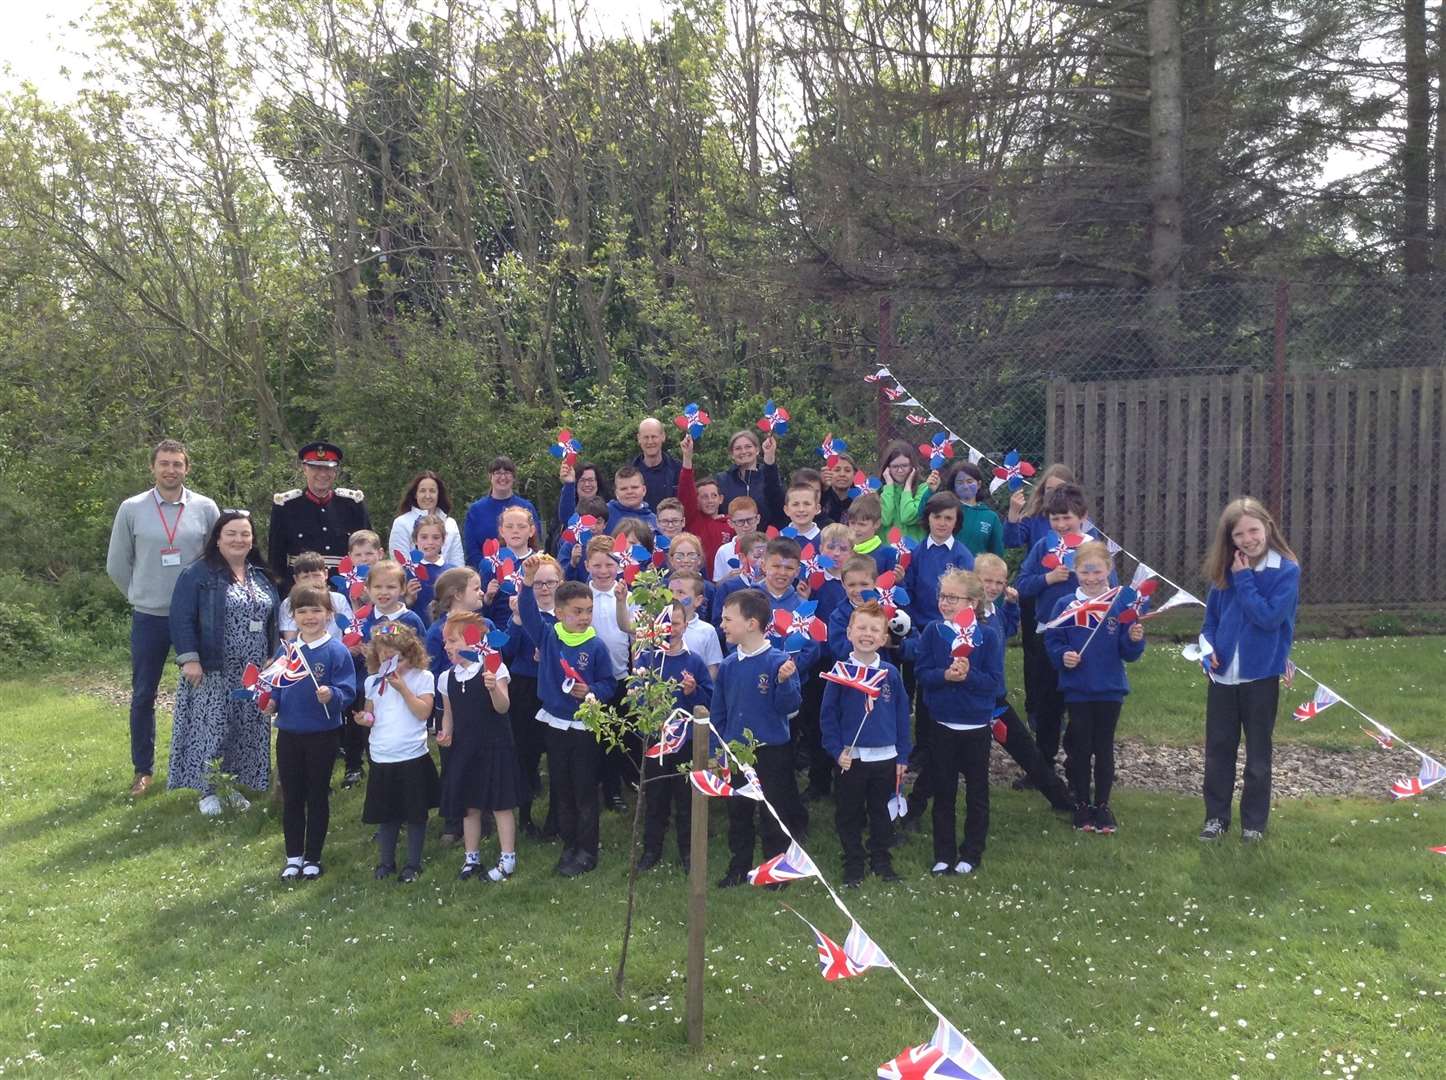 Bracdoen Primary School pupils and staff have been recognised for their work work planting trees for The Queen's Platinum Jubilee.